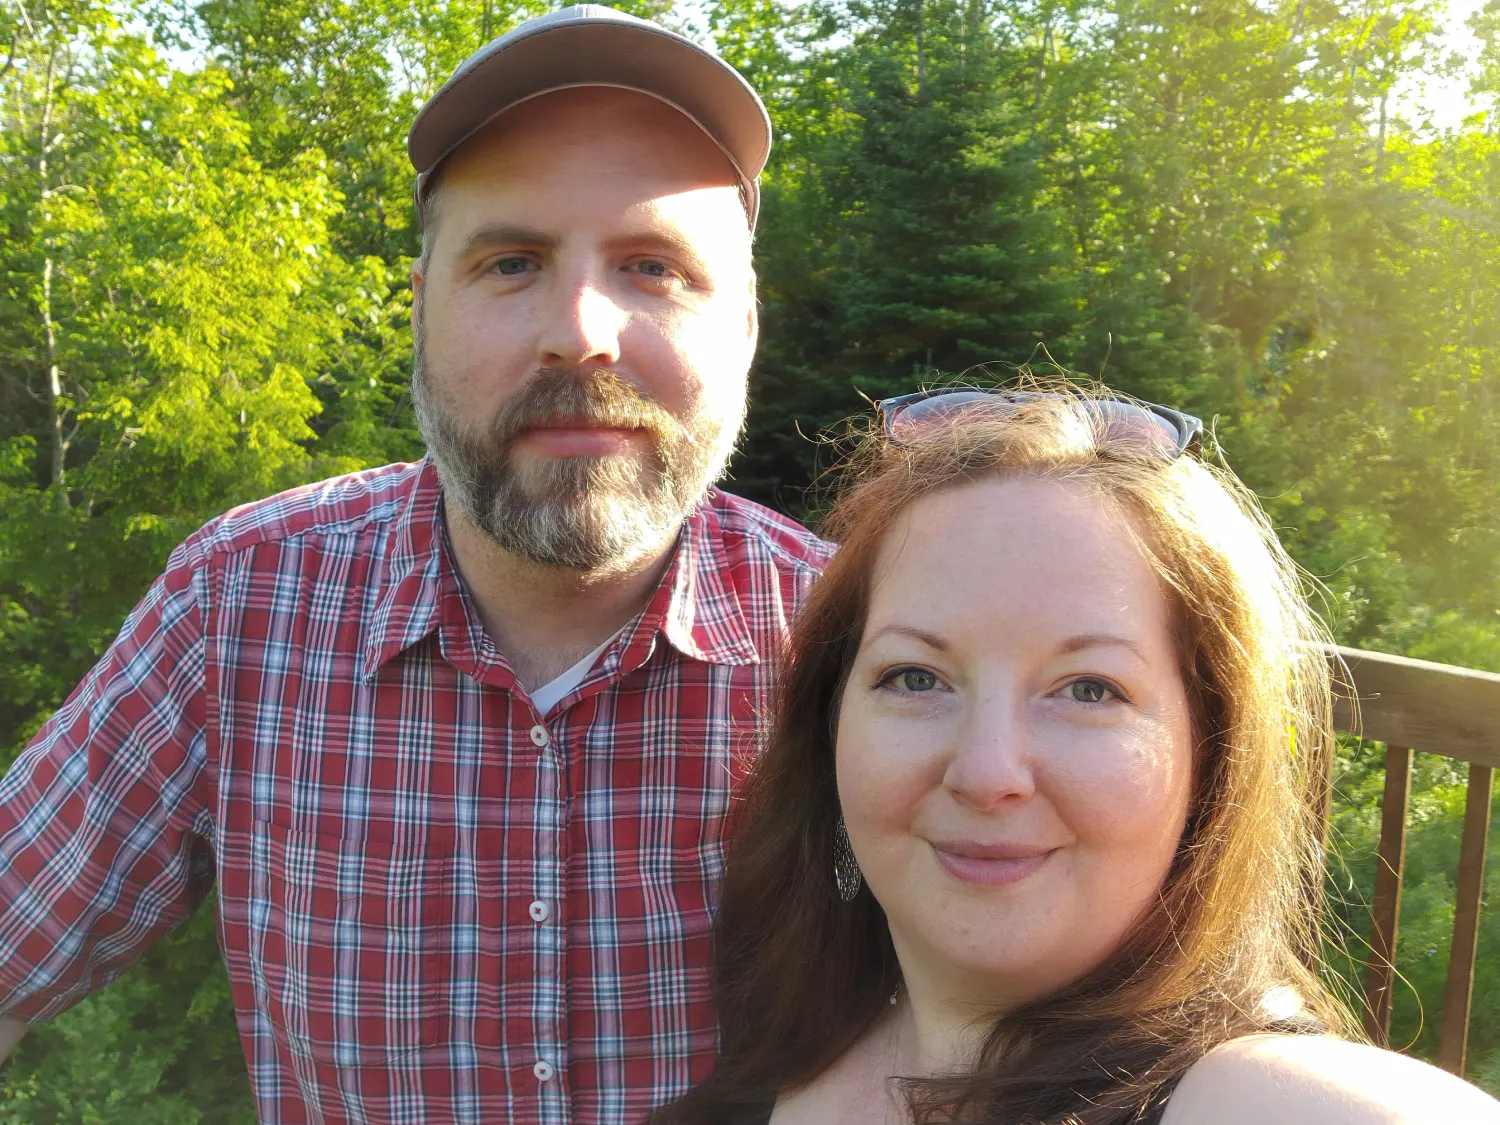 A photograph of Kyle Kelly and Jenn Kelly, of Covet standing in front of a forest.